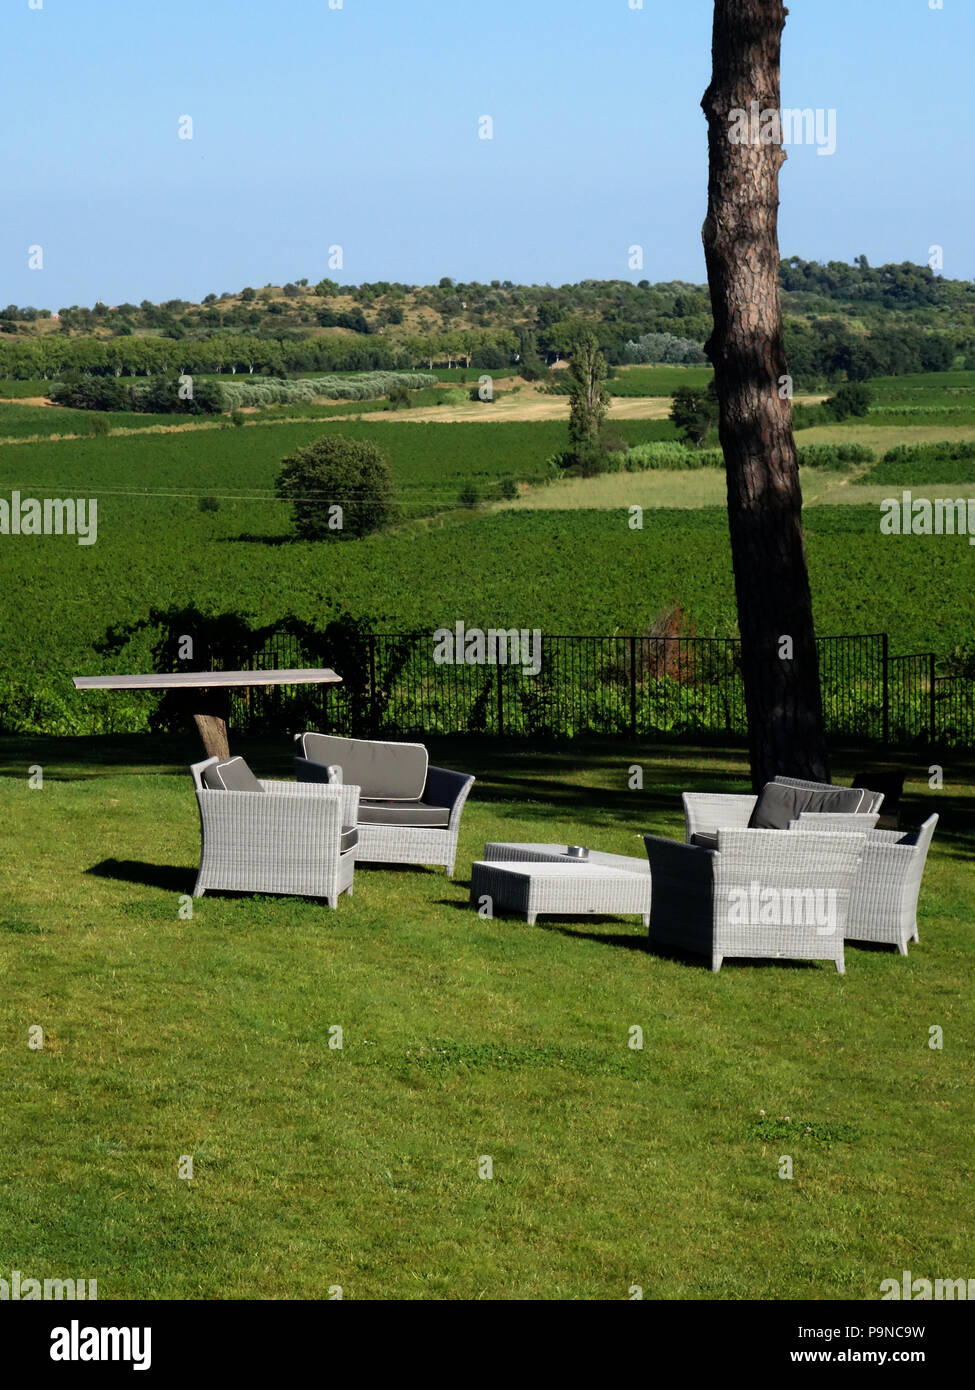 Wonderful places to sit and relax looking across the millions of vines owned by Château St Pierre de Serjac, near Magalas. Stock Photo